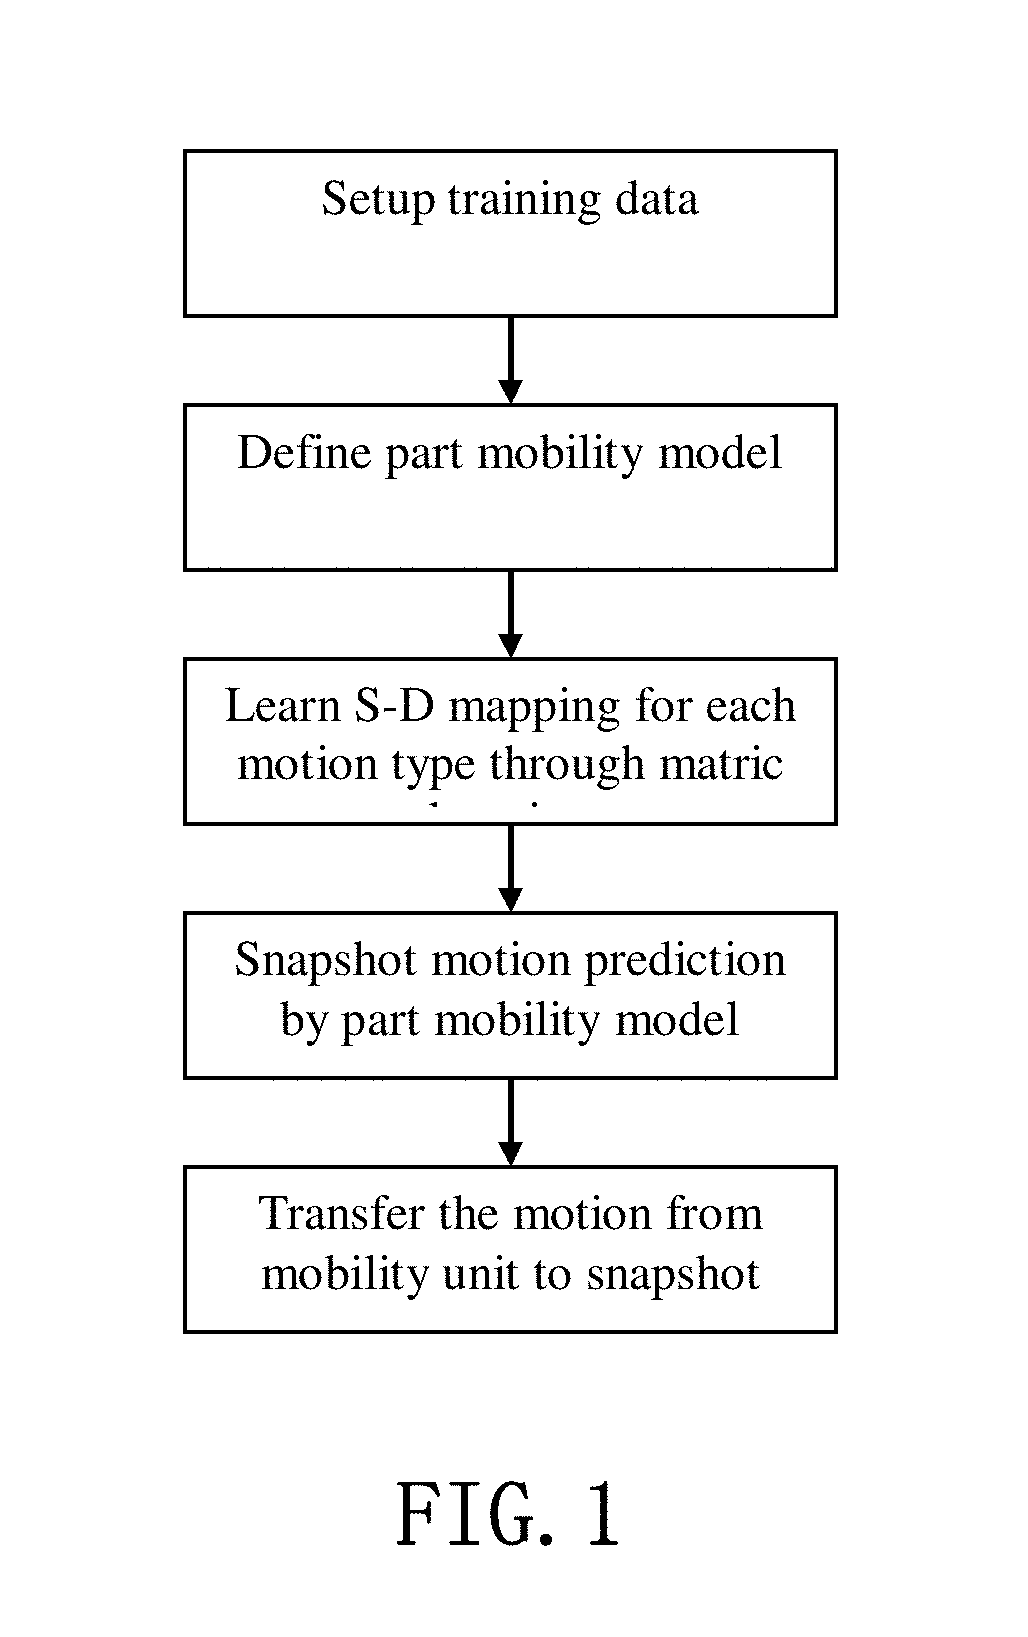 Method for Part Mobility Prediction Based on a Static Snapshot